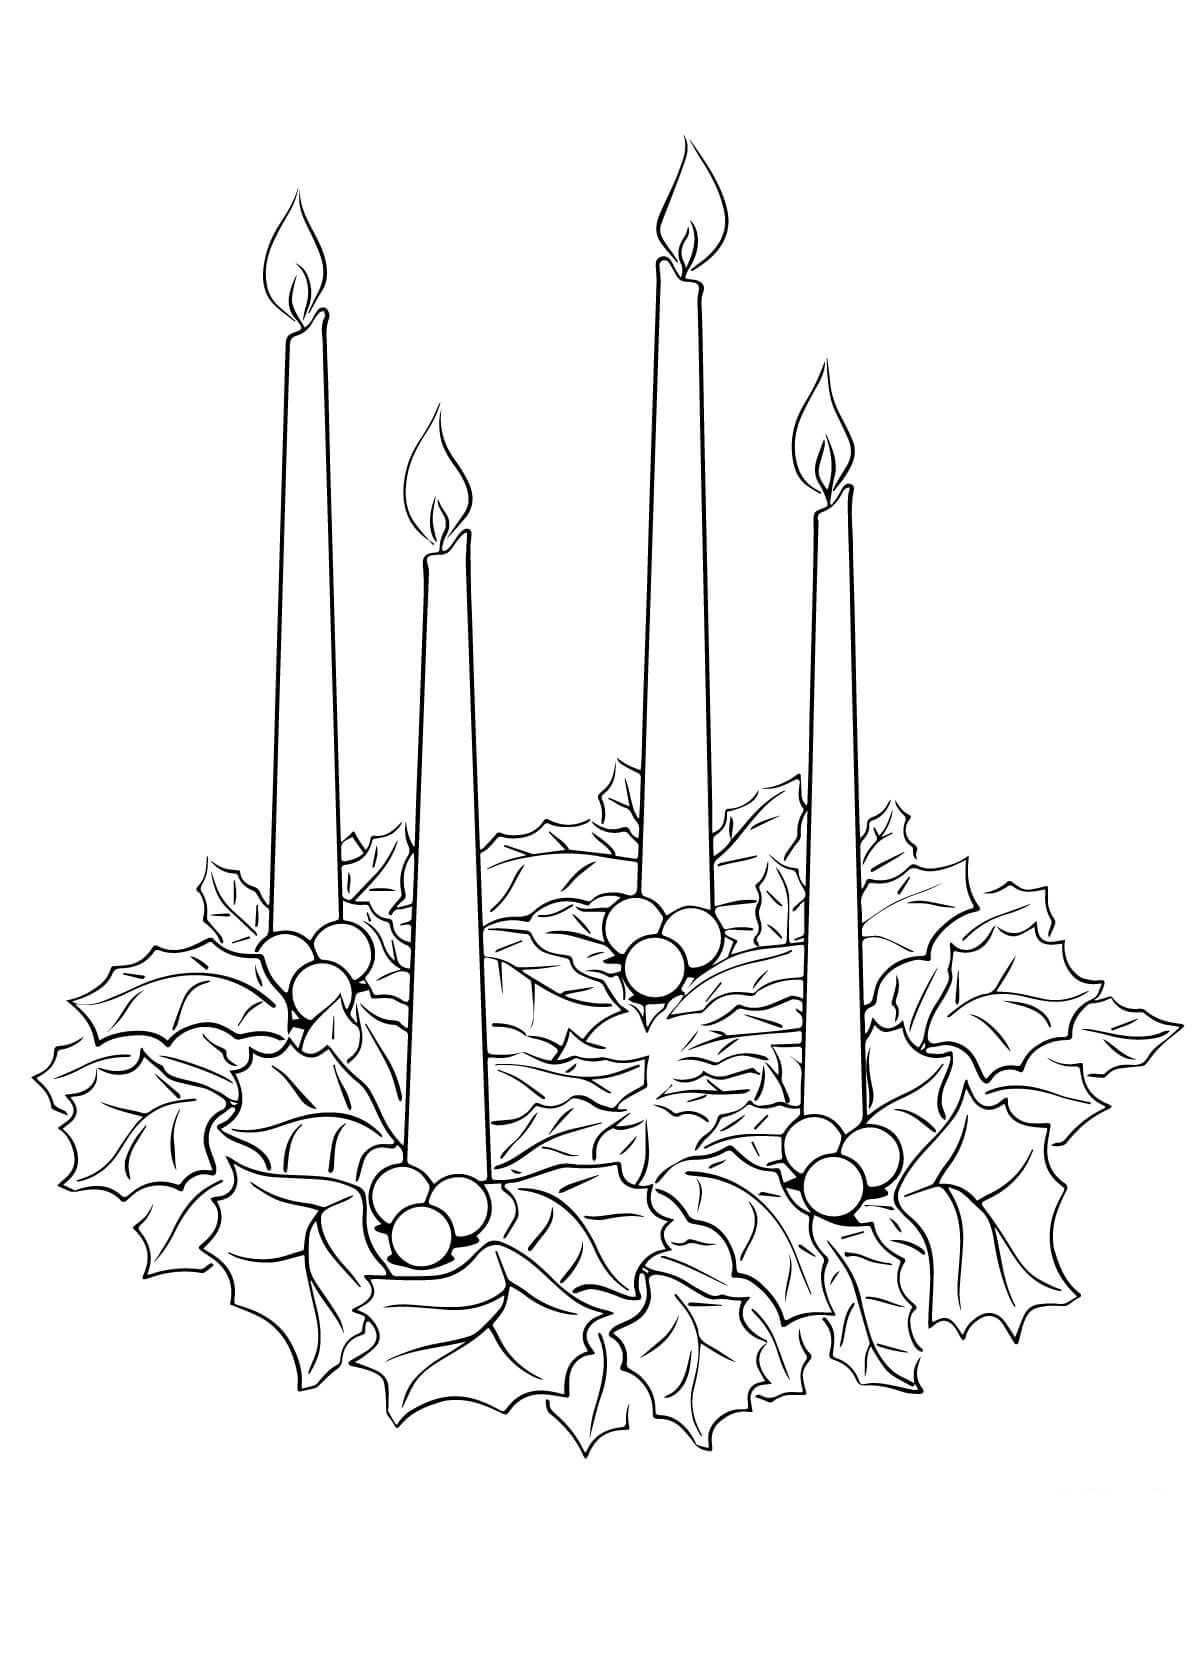 Free Printable Advent Peace Coloring Pages Pdf - Printable Advent Peace Coloring Pages